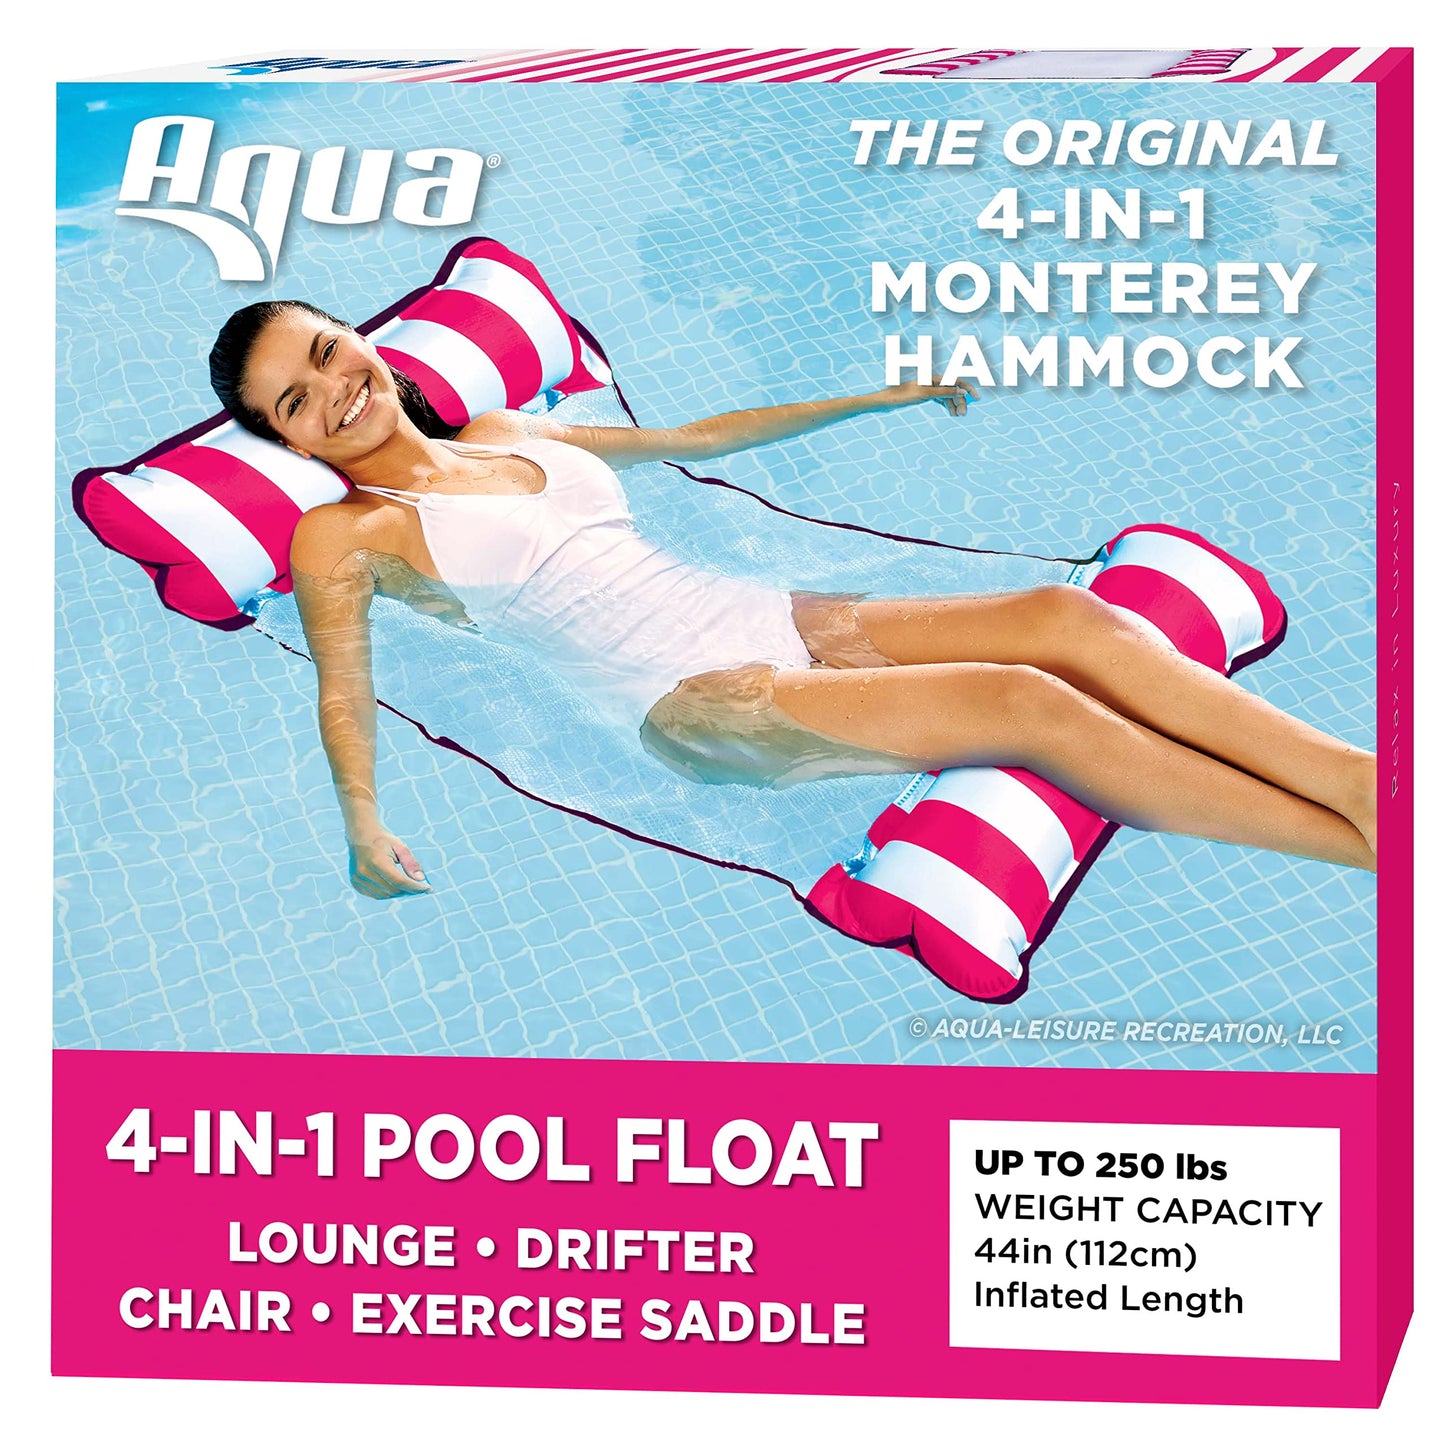 Aqua Original 4-in-1 Monterey Hammock Pool Float & Water Hammock – Multi-Purpose, Inflatable Pool Floats for Adults – Patented Thick, Non-Stick PVC Material – Pink Pink – Hammock